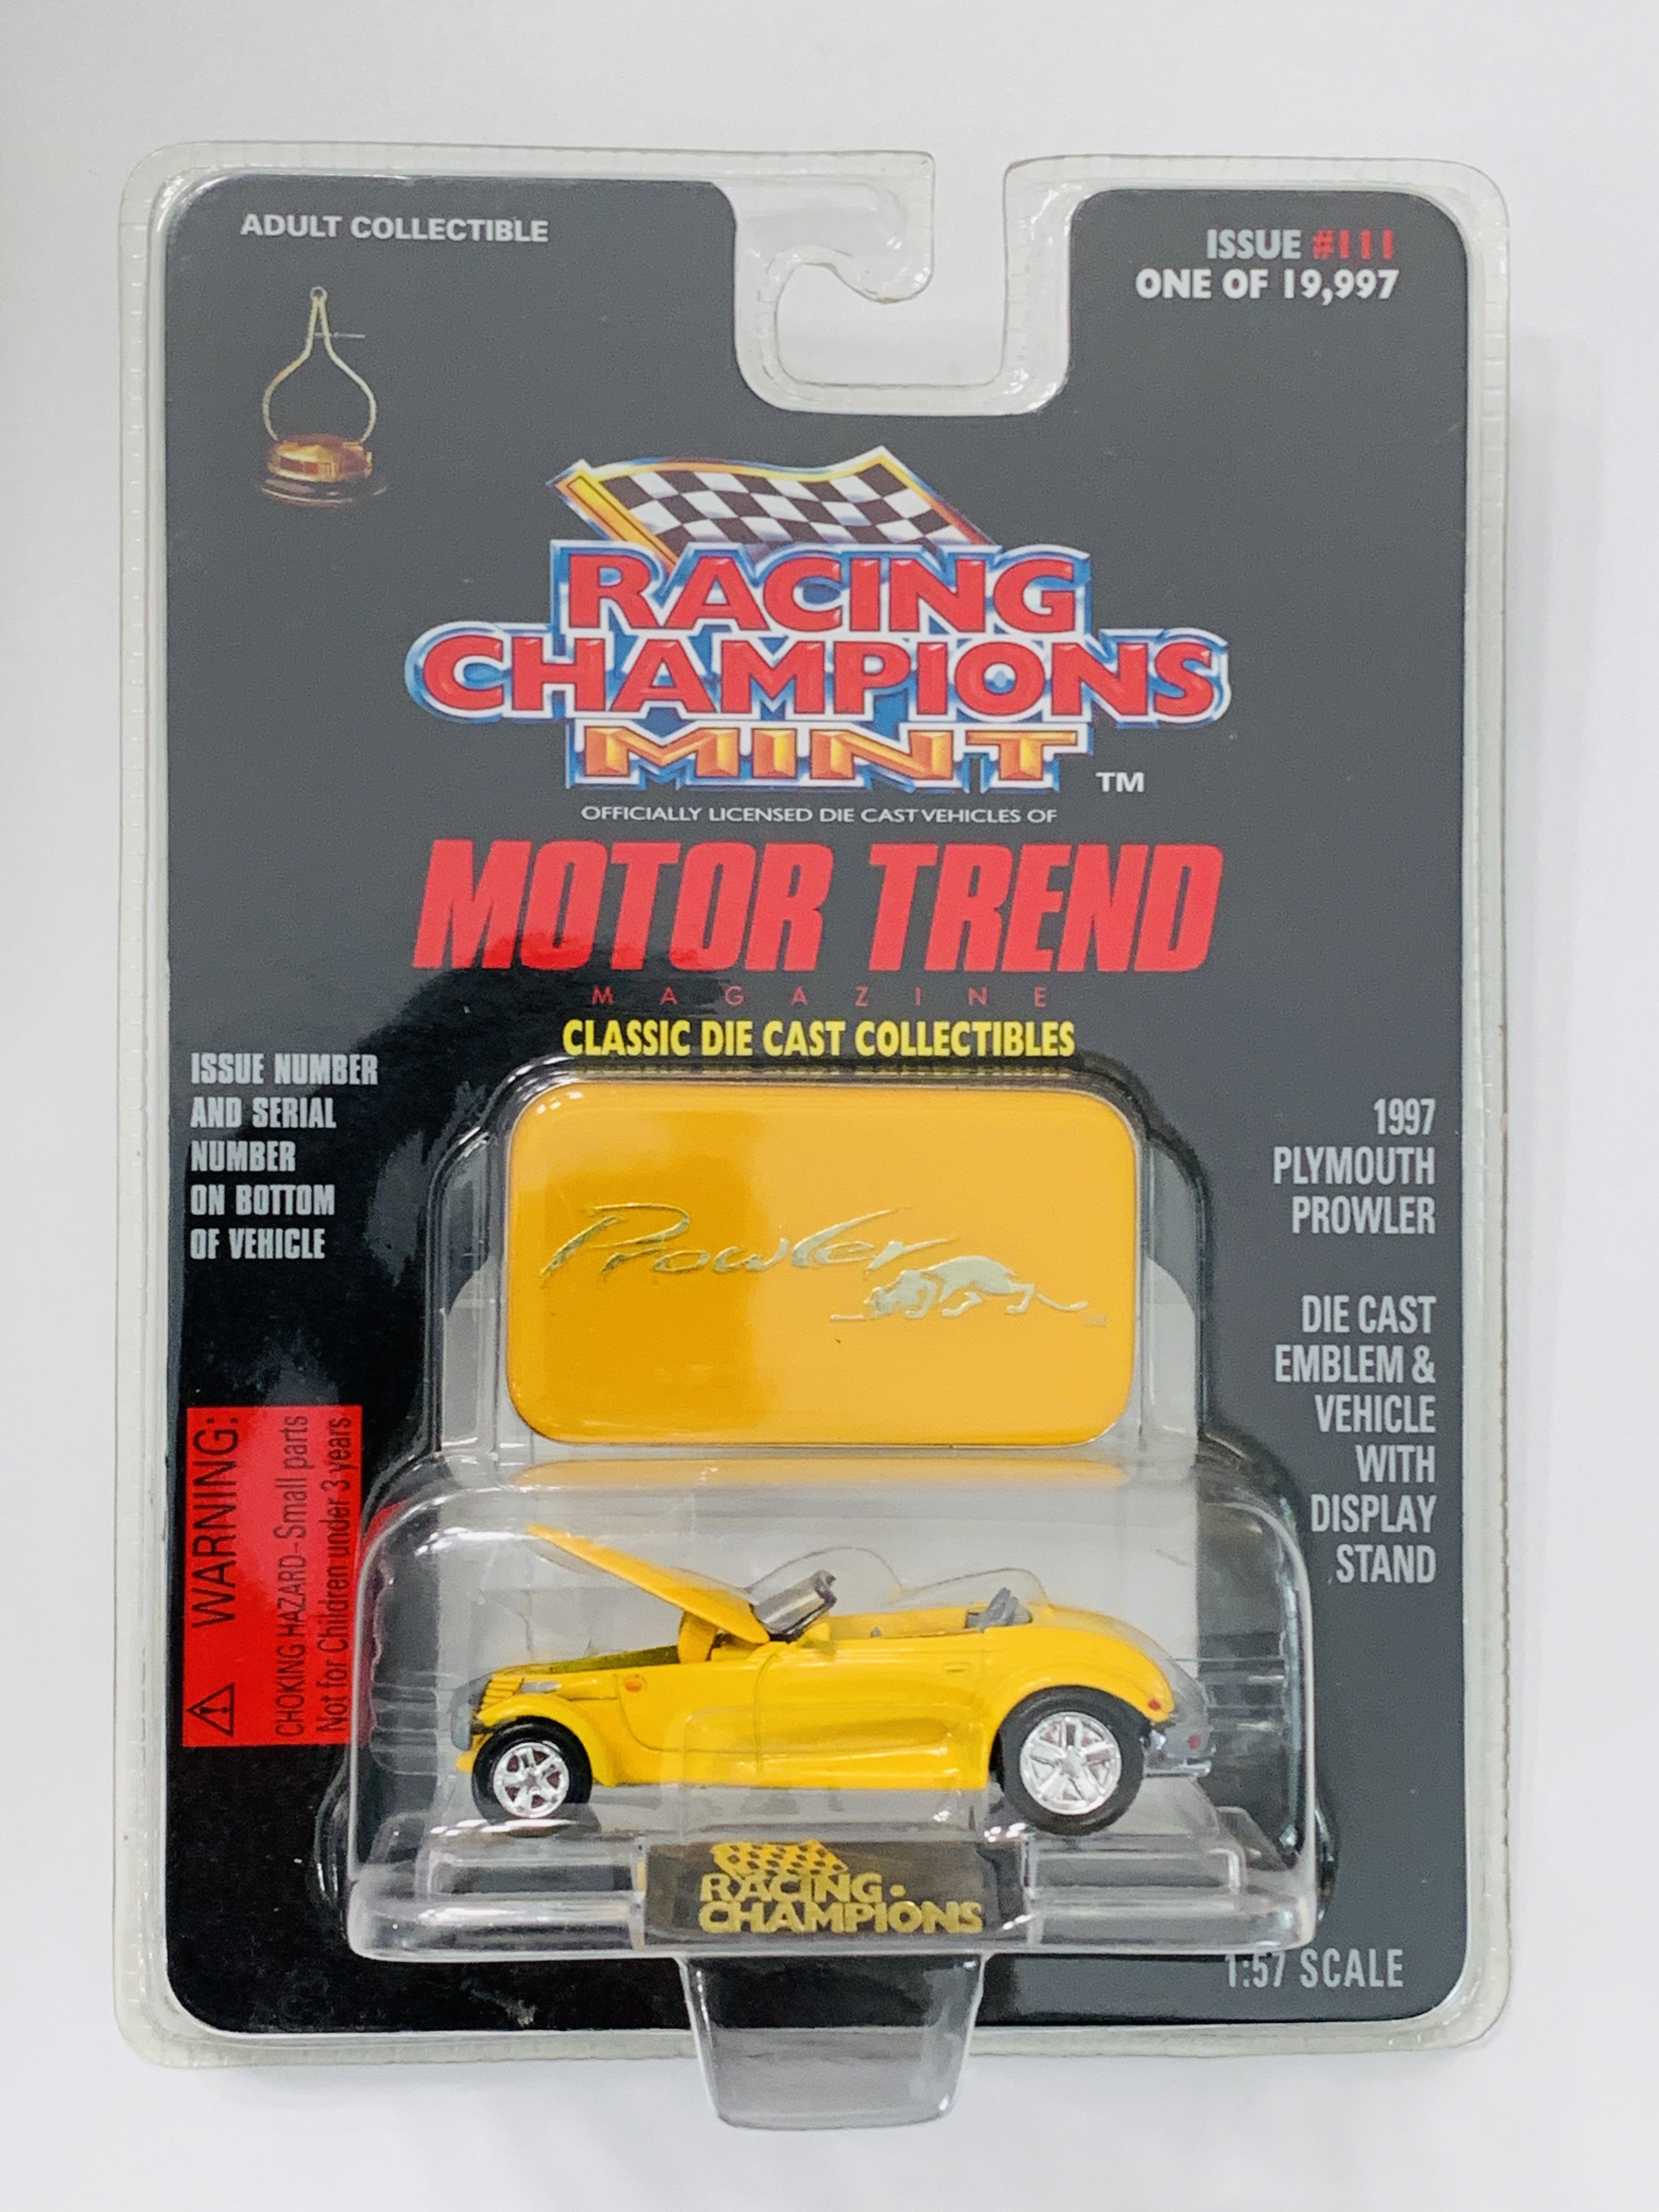 Racing Champions Mint Edition 1997 Plymouth Prowler - Yellow